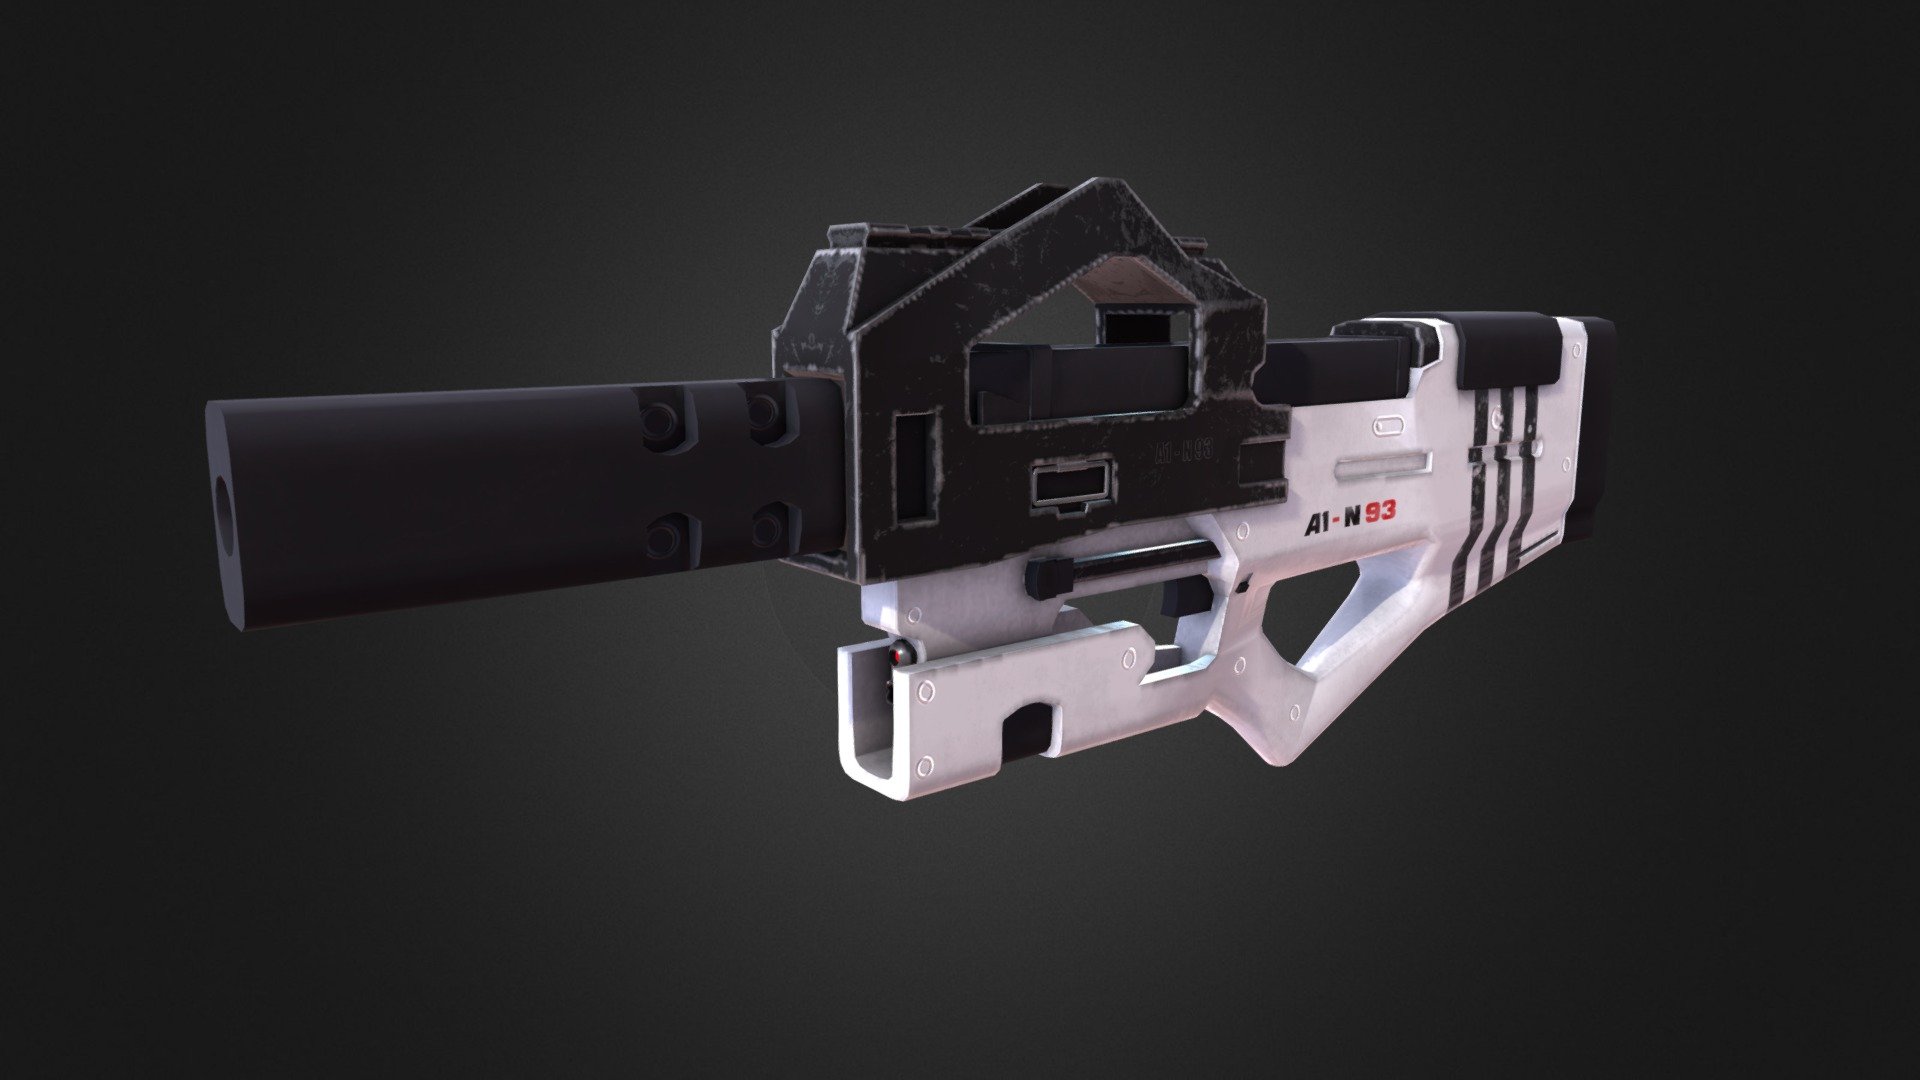 The A1-N93 it's a suppressed sort of a futuristic variation of the well known P90, for a game (at the time paused ) called Swarm.
it has less than 6k poly as my lead artist indicated me for the project.

http://www.indiedb.com/games/swarm - A1-N93 - Buy Royalty Free 3D model by Reset (@Reset6) 3d model